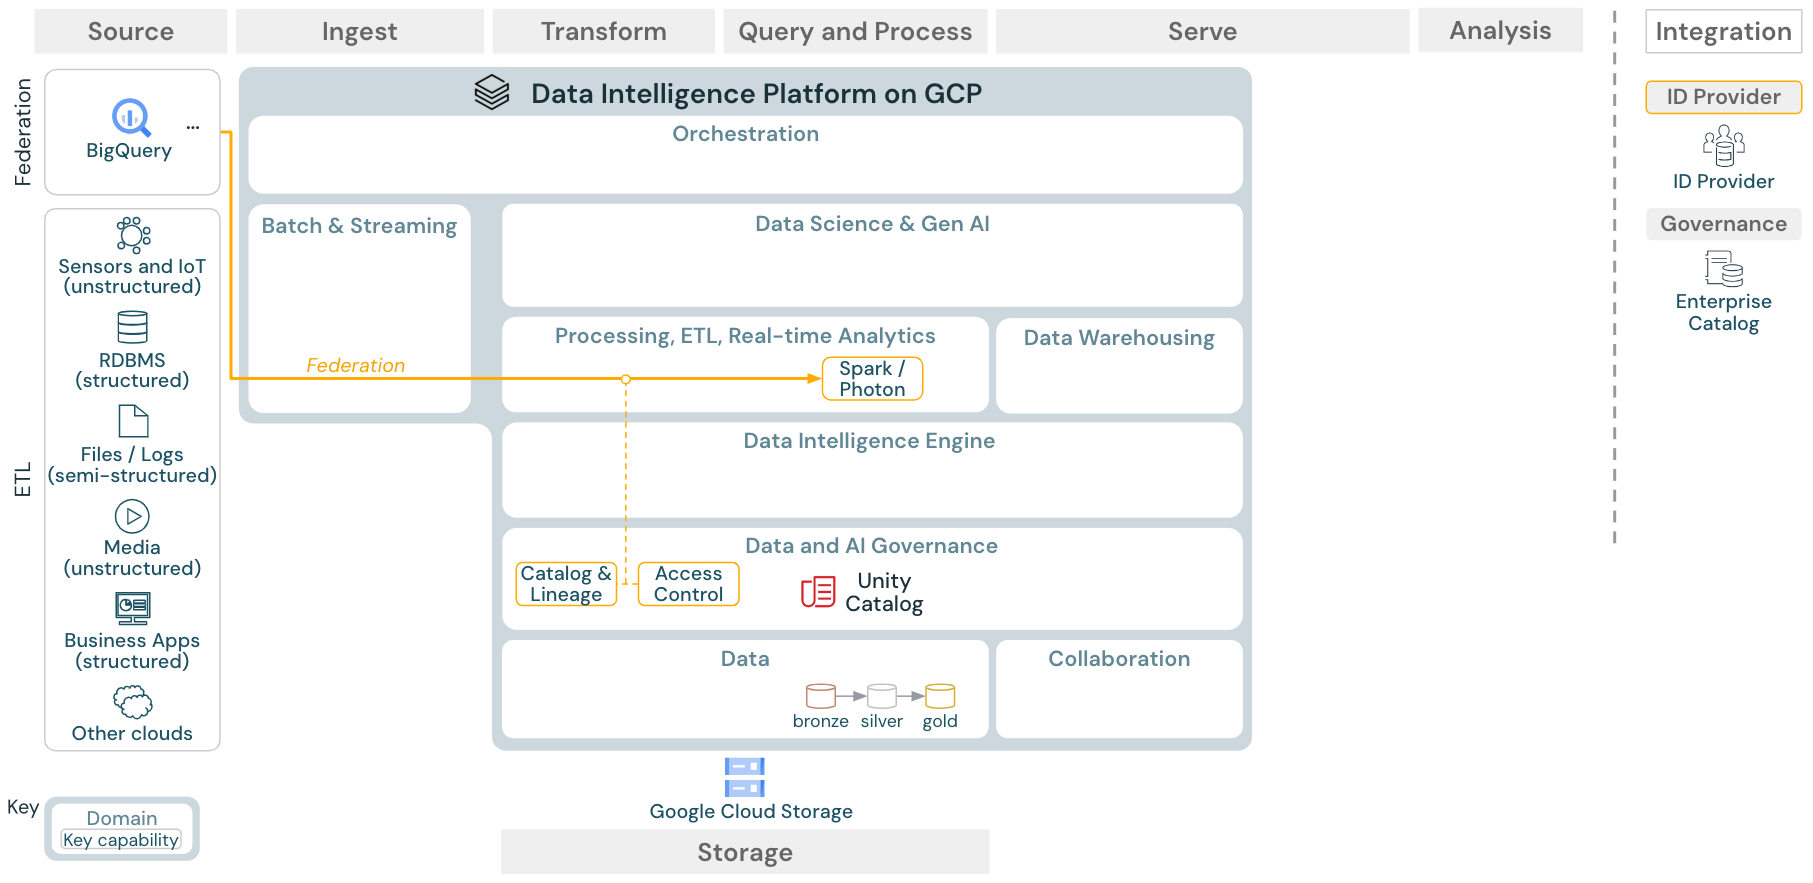 Lakehouse federation reference architecture for Databricks on Google Cloud